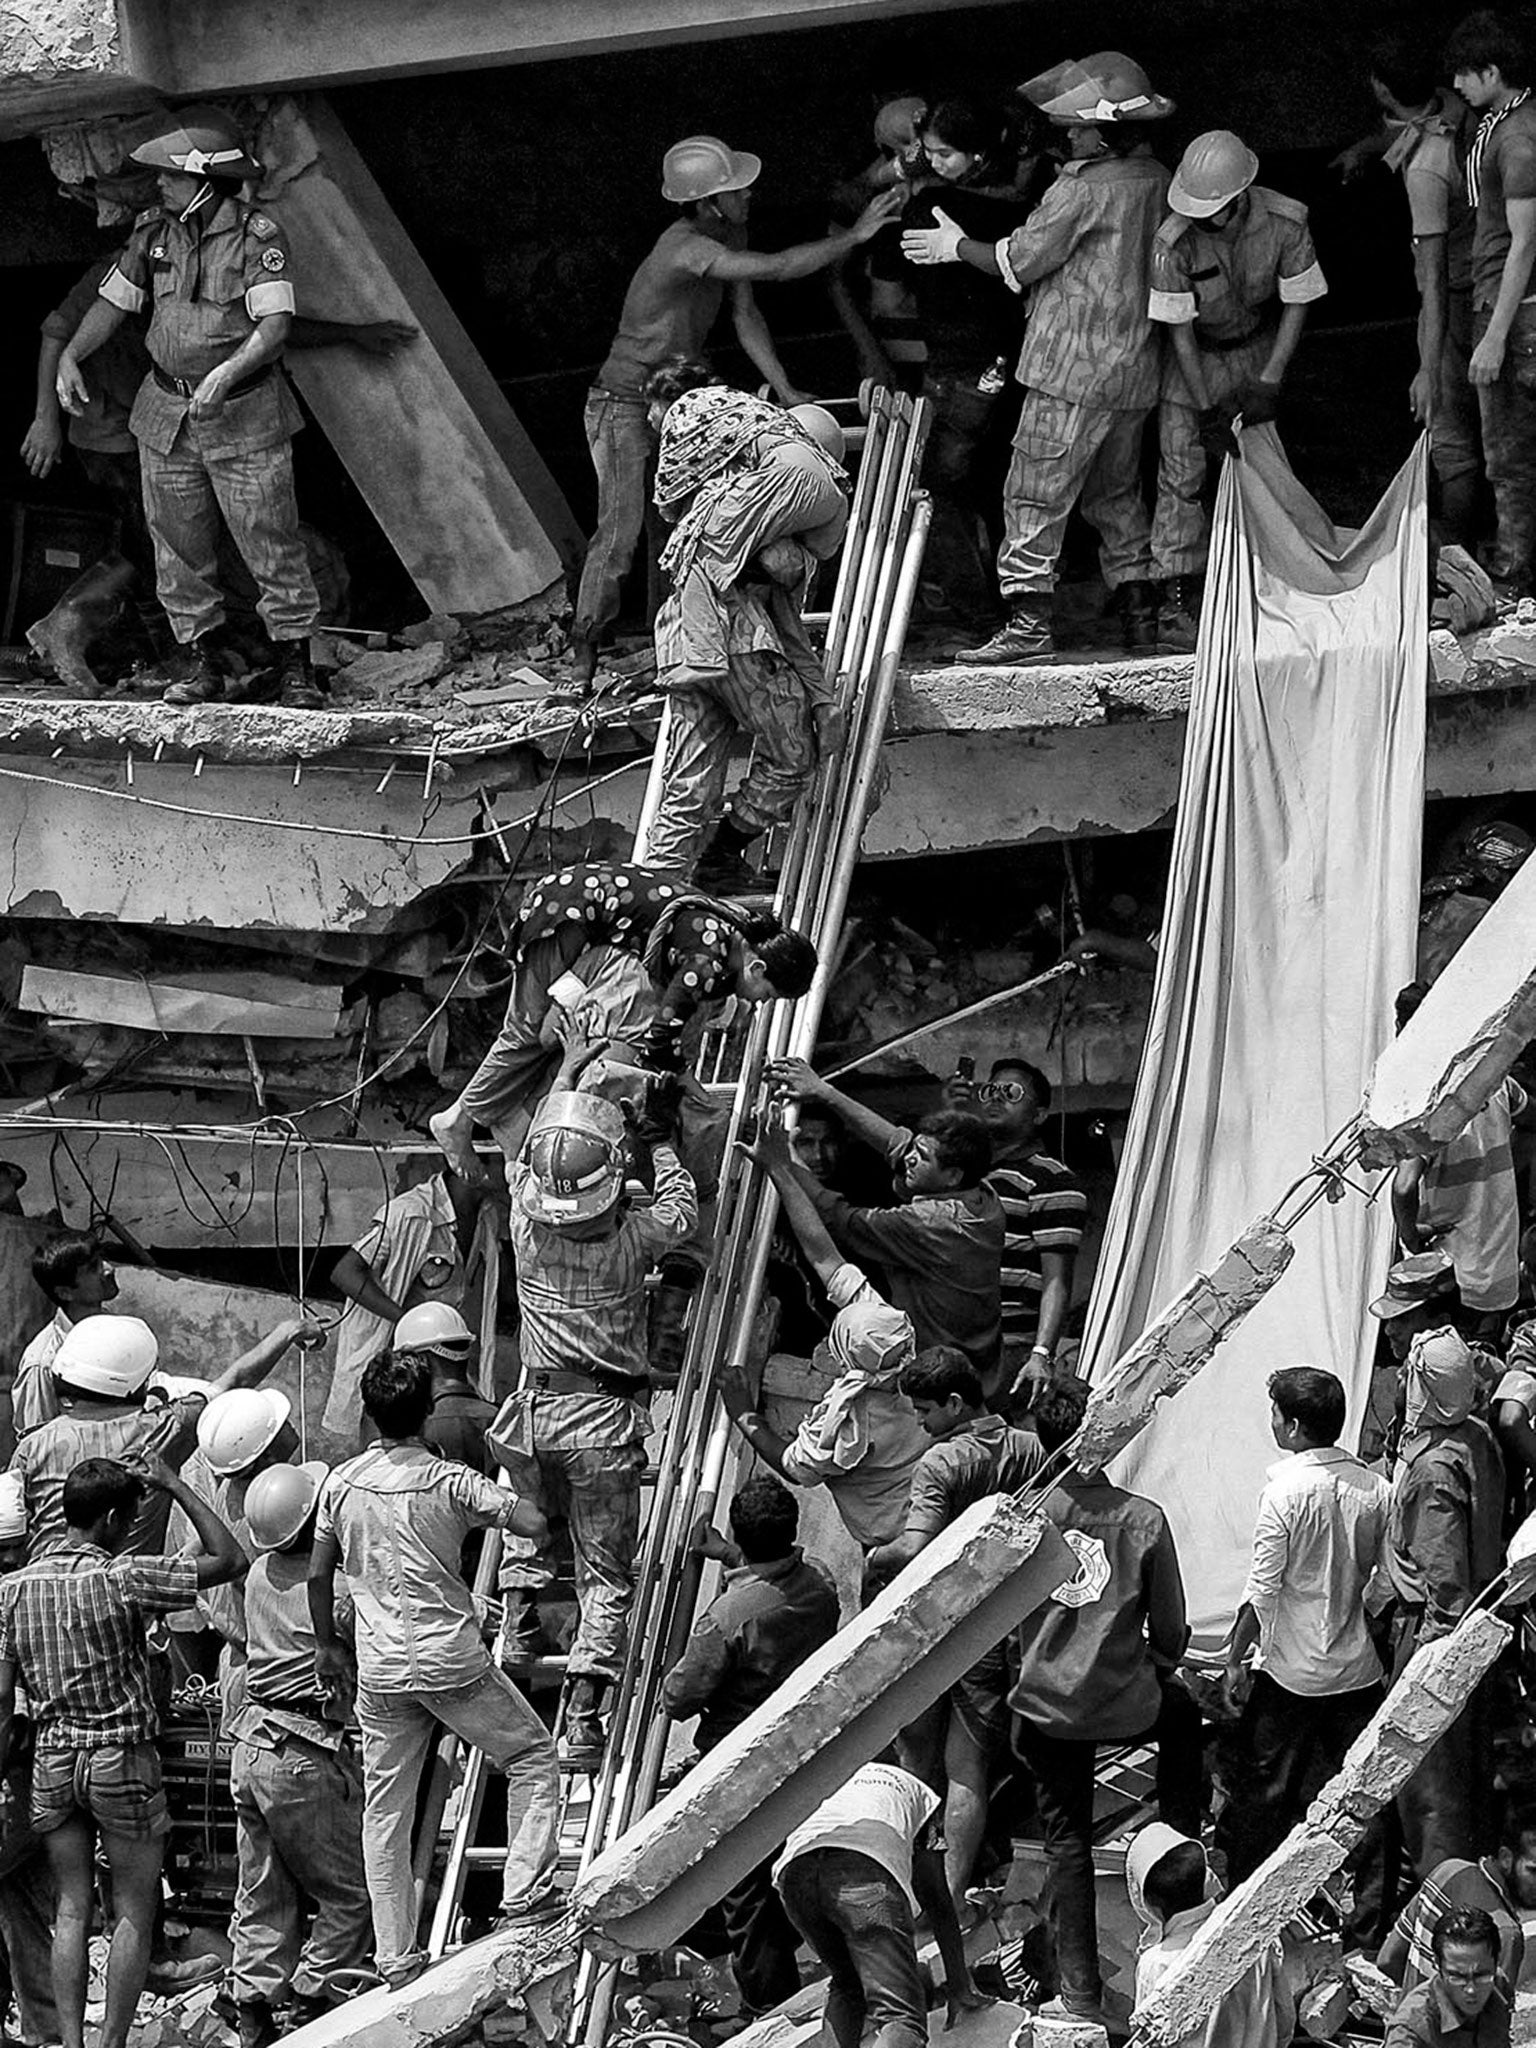 Rescuers pull out wounded workers of the wrecked eight-storey factory building that caves in on the outskirts of Bangladesh capital Dhaka on 24 April 2013 © Monirul Alam